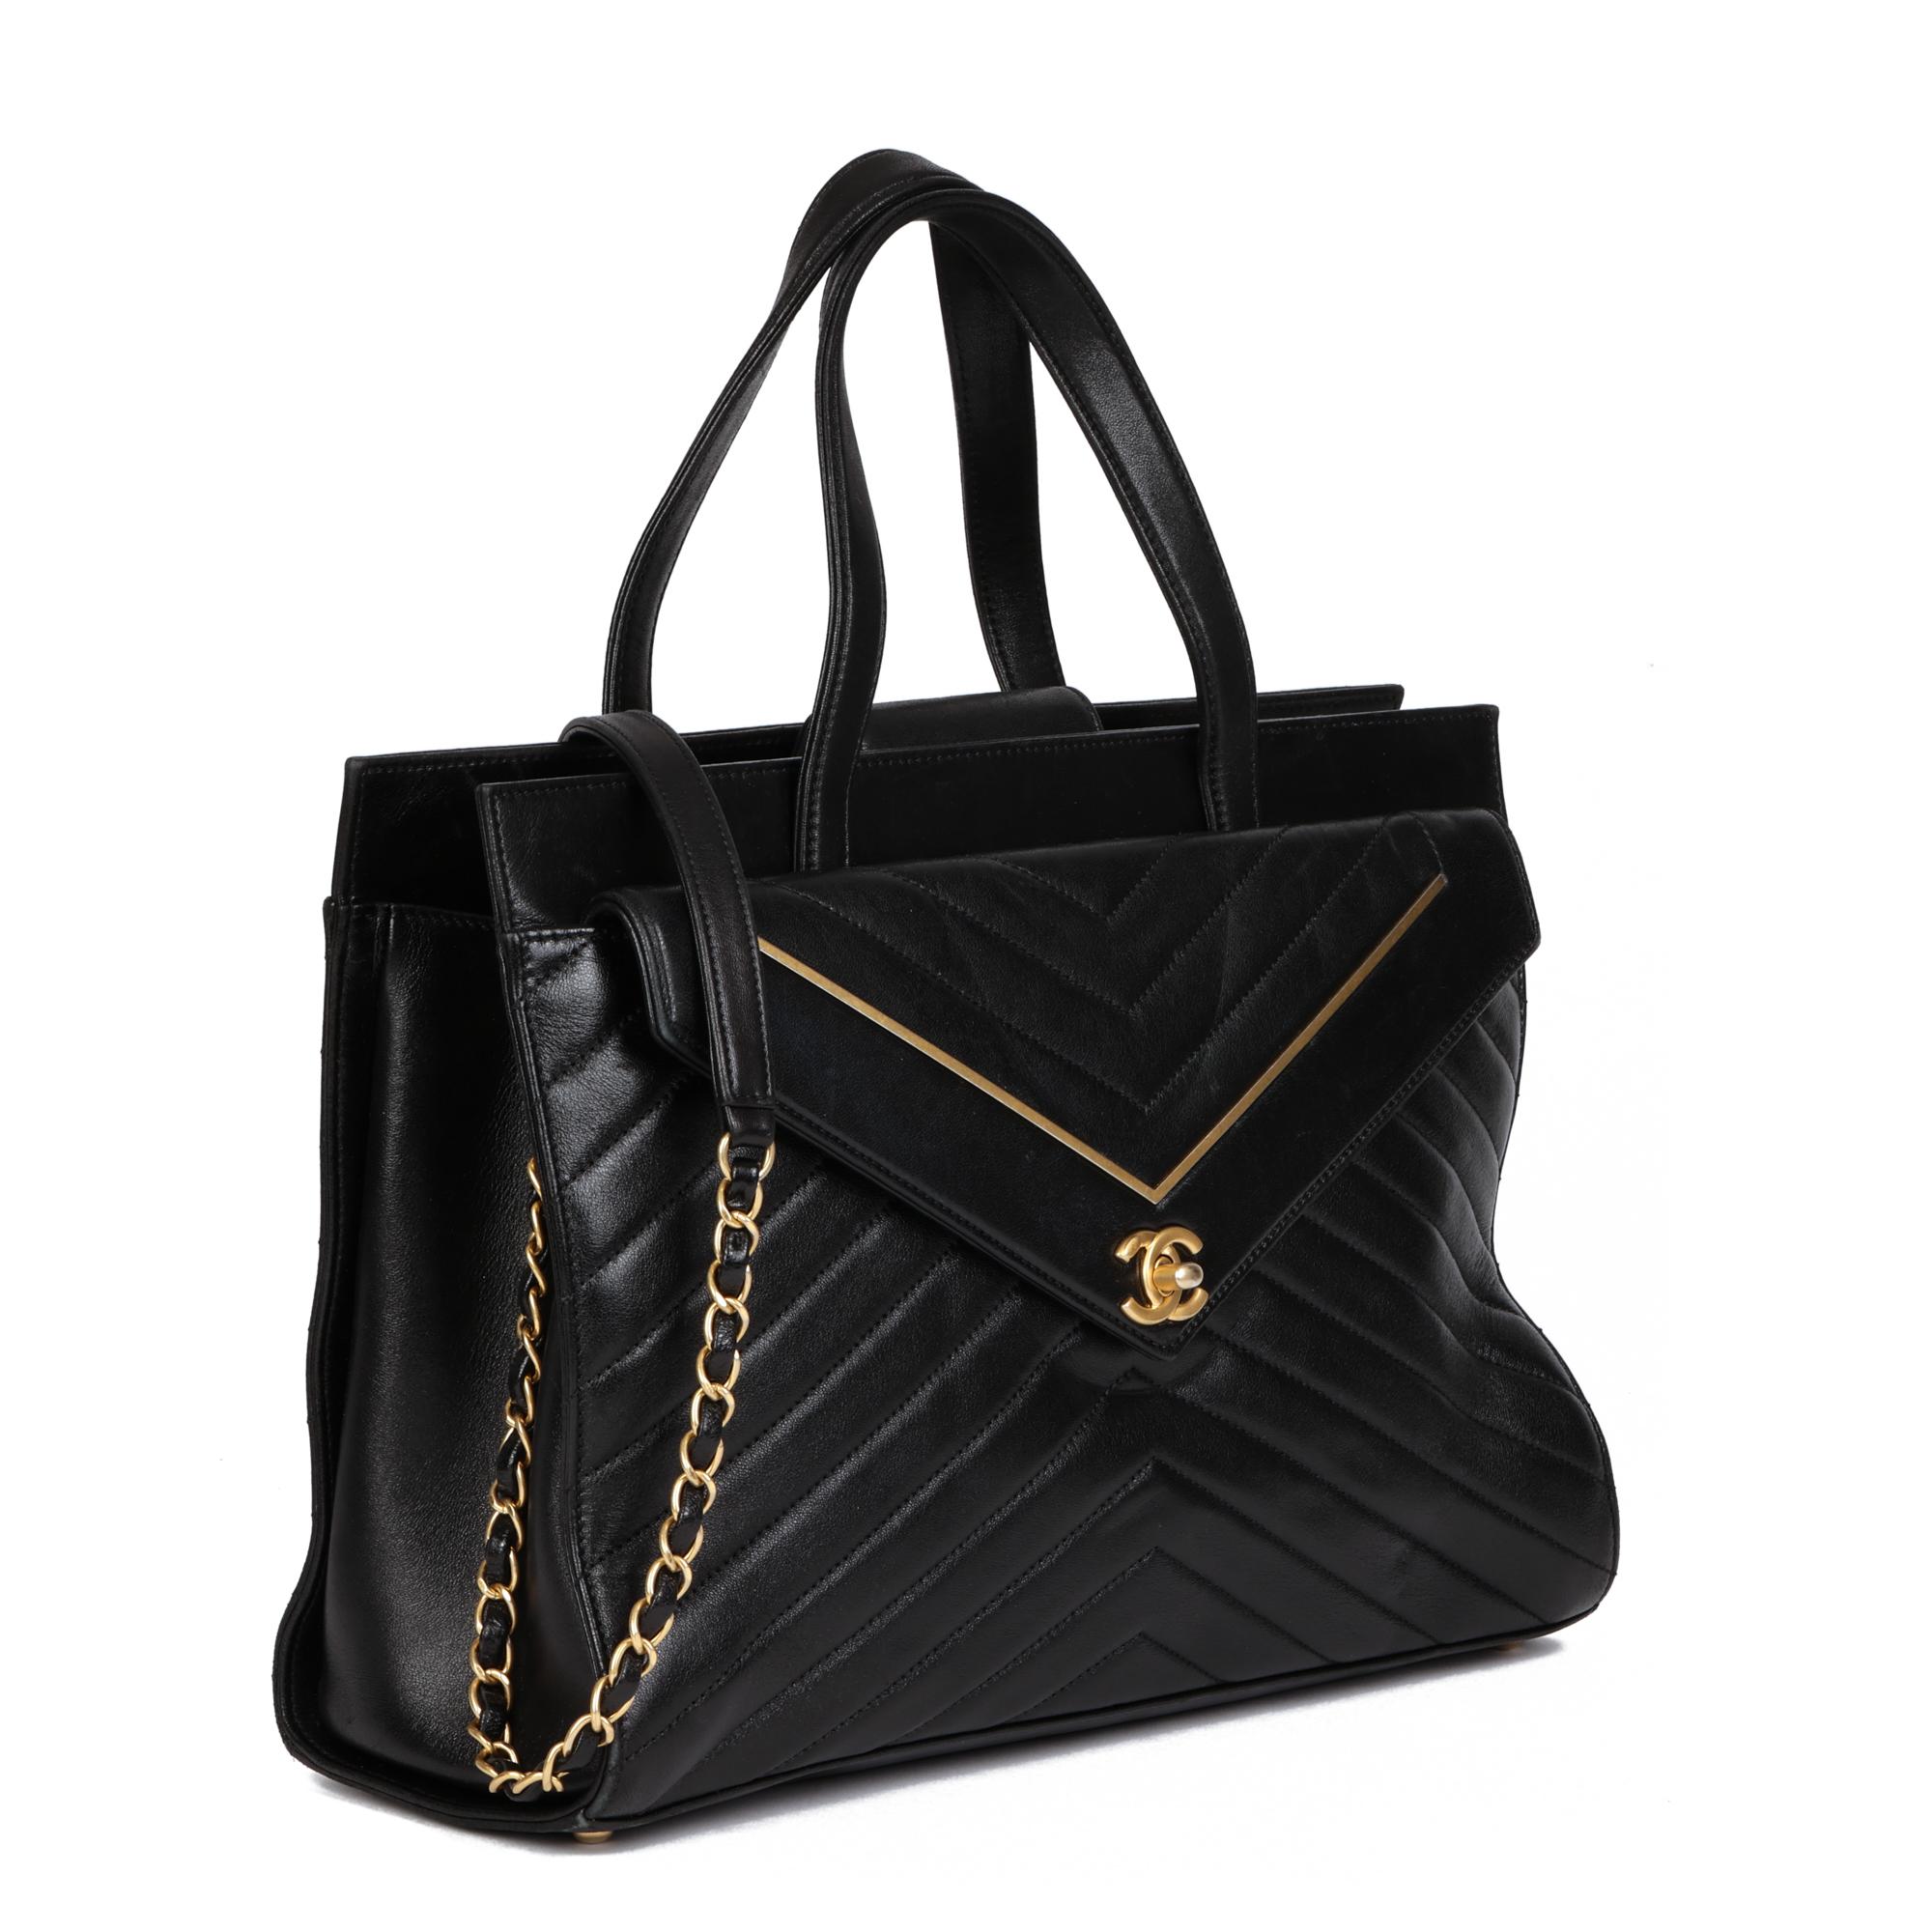 CHANEL
Black Chevron Quilted Lambskin Classic Shoulder Tote

Serial Number: 24737143
Age (Circa): 2017
Accompanied By: Chanel Shoulder Strap
Authenticity Details: Serial Sticker (Made in Italy)
Gender: Ladies
Type: Tote, Shoulder

Colour: